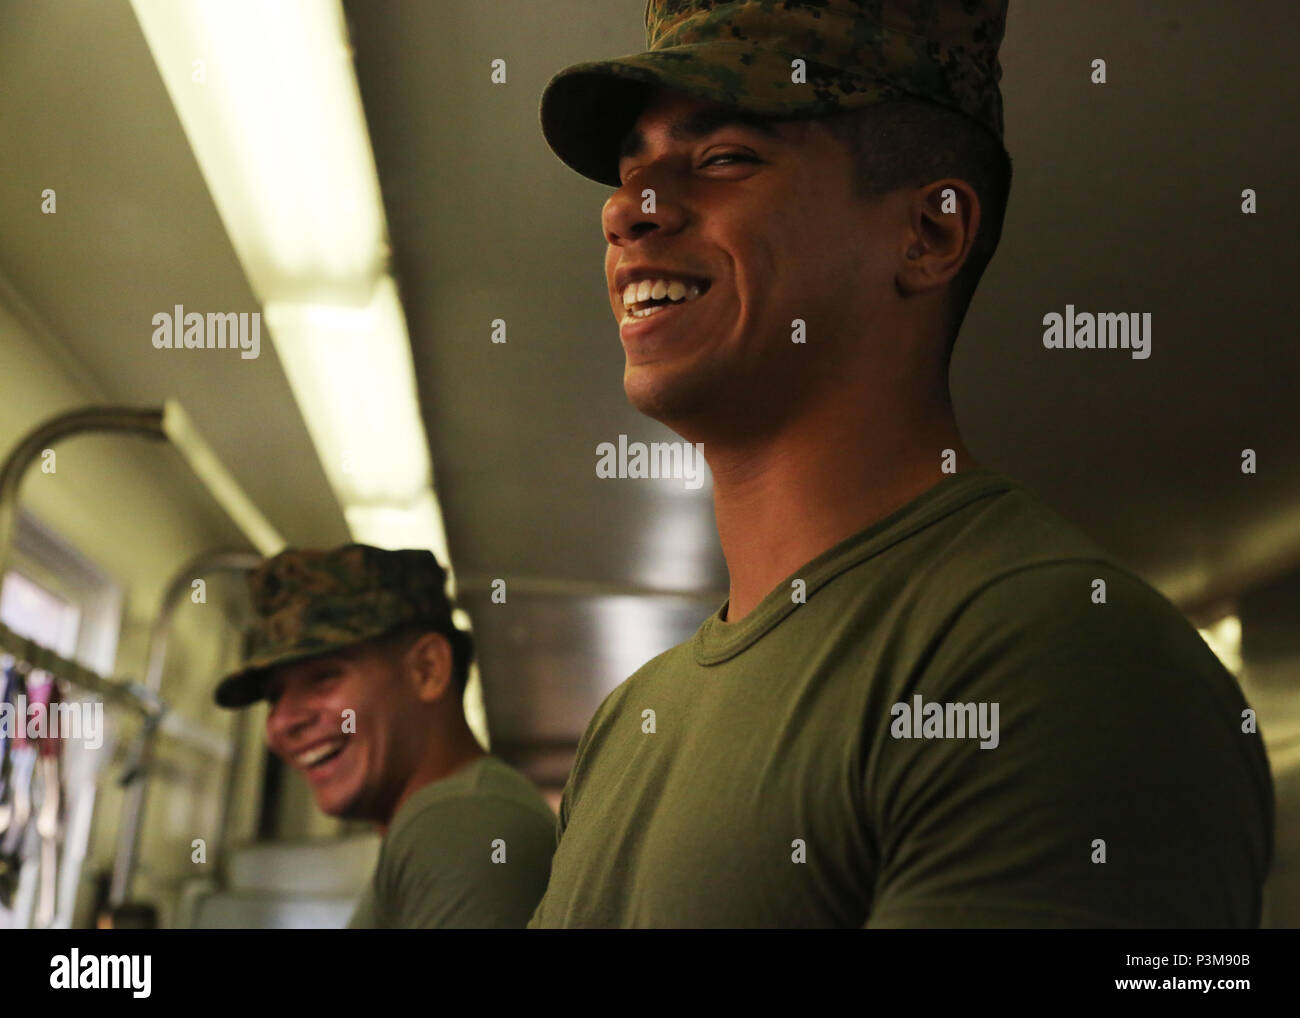 160710-N-ND246-007 POHAKULOA TRAINING AREA, Hawaii (July 10, 2016) – Lance Cpl. Teran Moises jokes with another mess hall worker in Pohakuloa Training Area, Hawaii, July 10, 2016, during Rim of the Pacific 2016. Twenty-six nations, 49 ships, six submarines, about 200 aircraft, and 25,000 personnel are participating in RIMPAC 2016 from June 29 to Aug. 4 in and around the Hawaiian Islands and Southern California. The world’s largest international maritime exercise, RIMPAC provides a unique training opportunity while fostering and sustaining cooperative relationships between participants critical Stock Photo